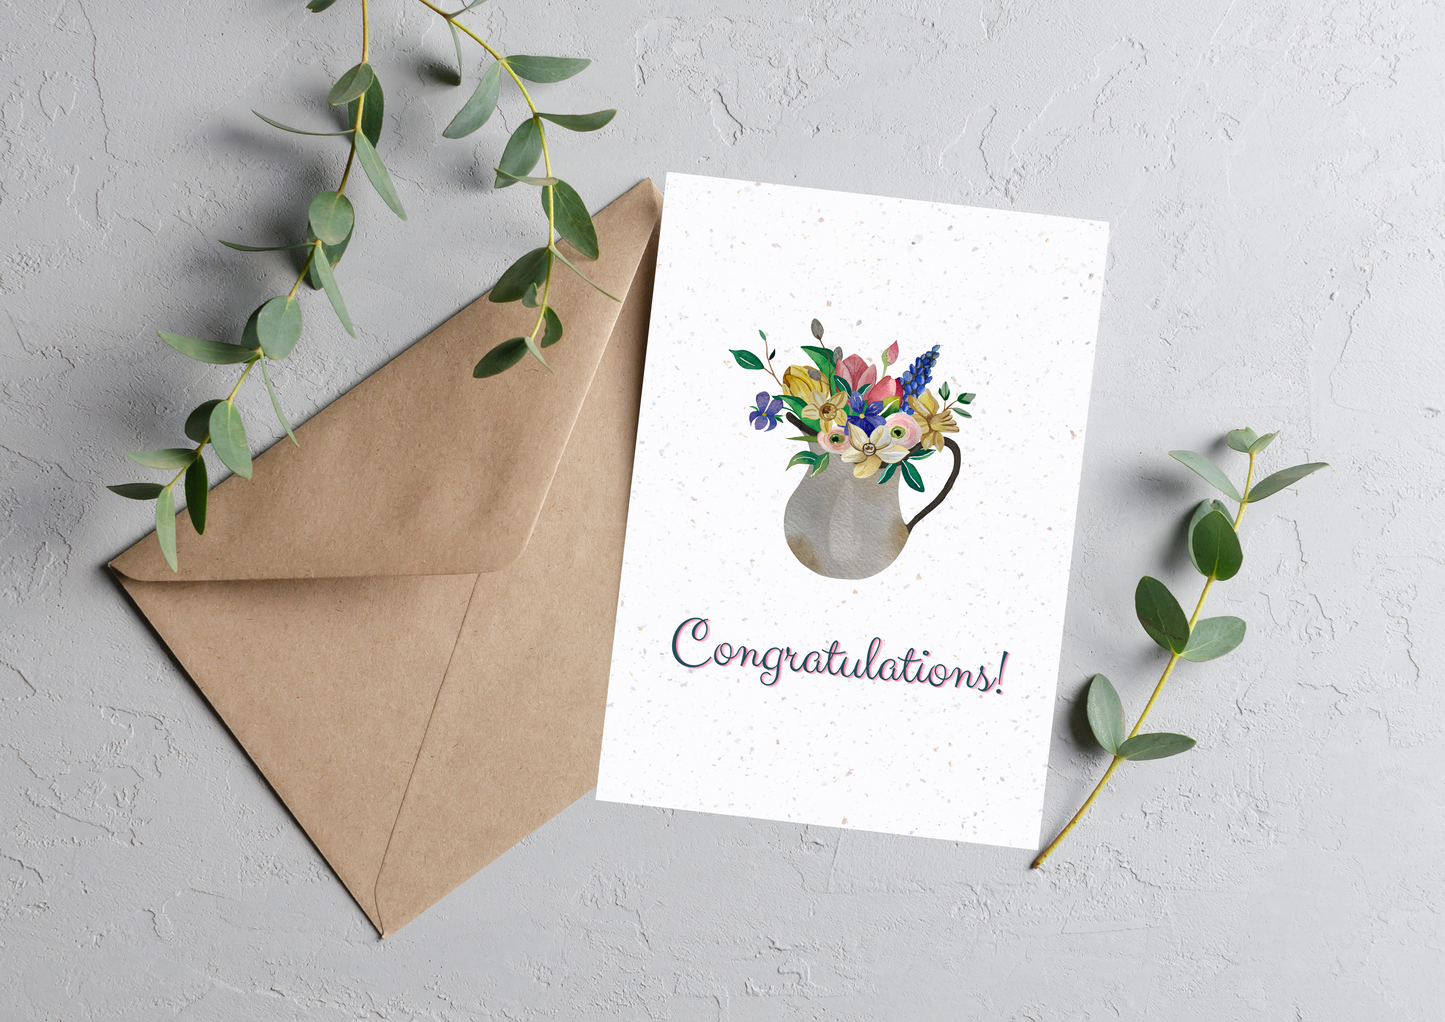 Congratulations 3  - Personalized Seed Paper Greeting Card